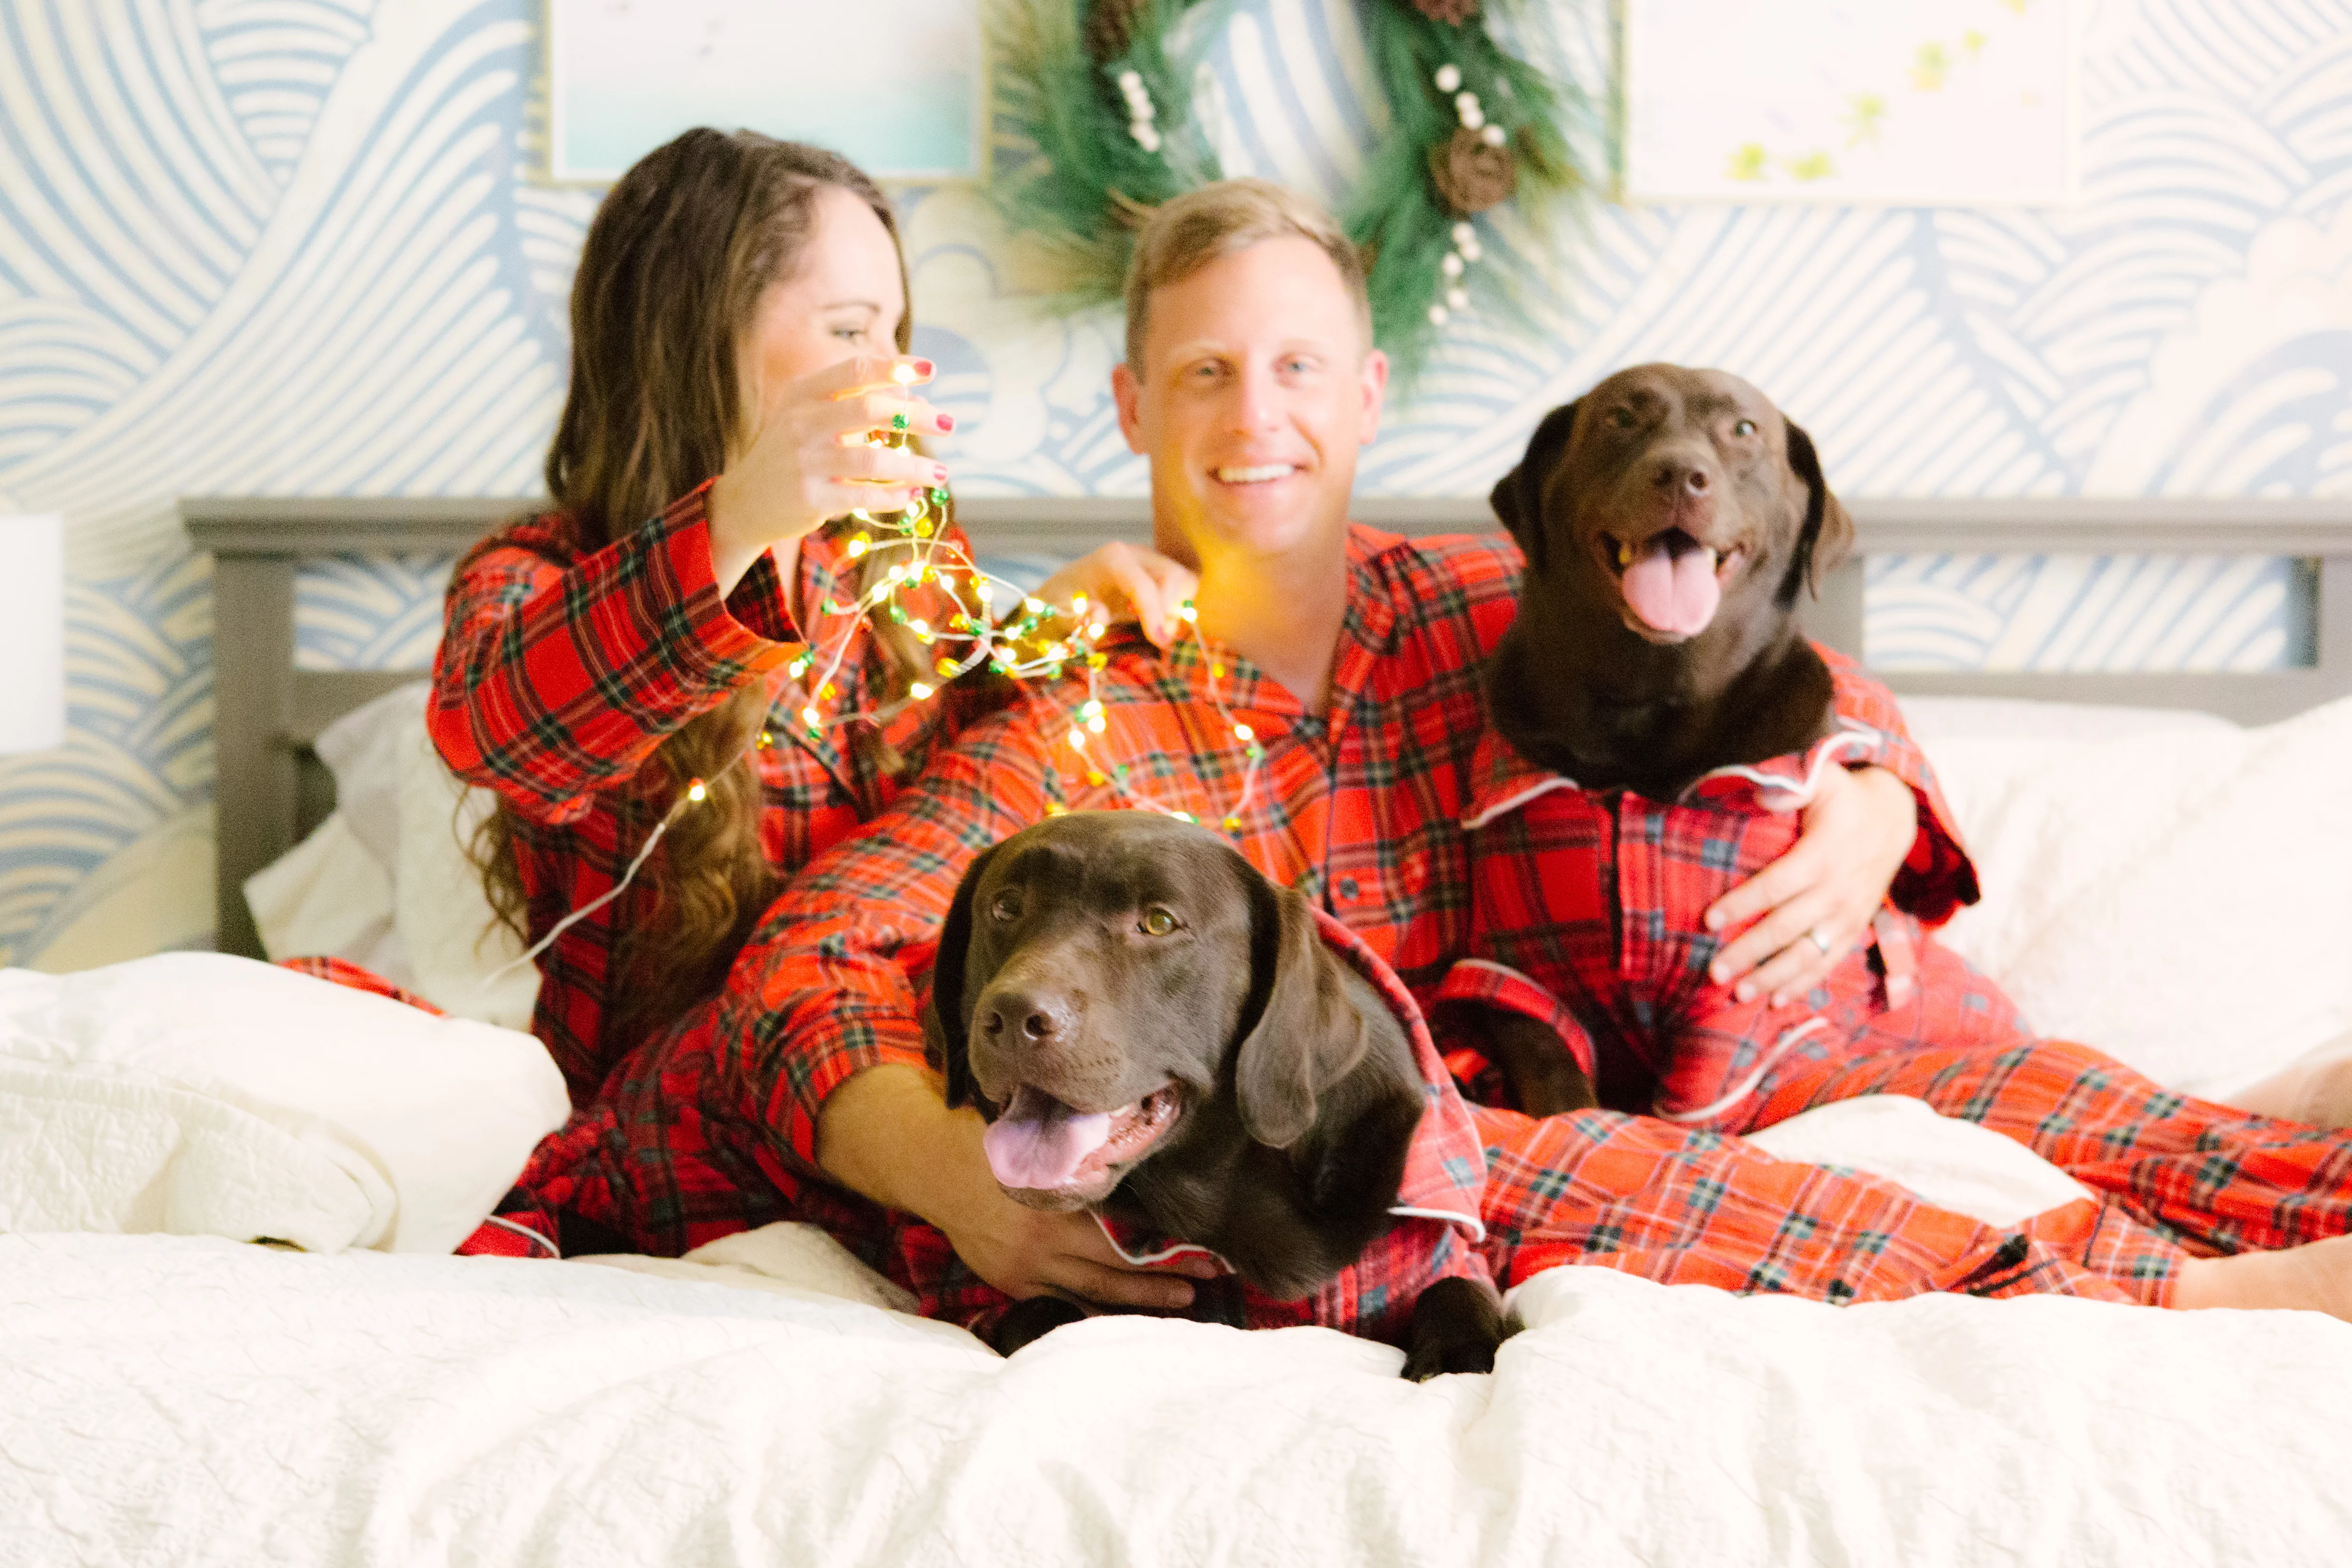 Our 2017 Christmas Card Reveal - Family Photos In Christmas Pajamas - Dogs In Pajamas - Christmas Pajamas - Matching Family Pajamas - Communikait by Kait Hanson